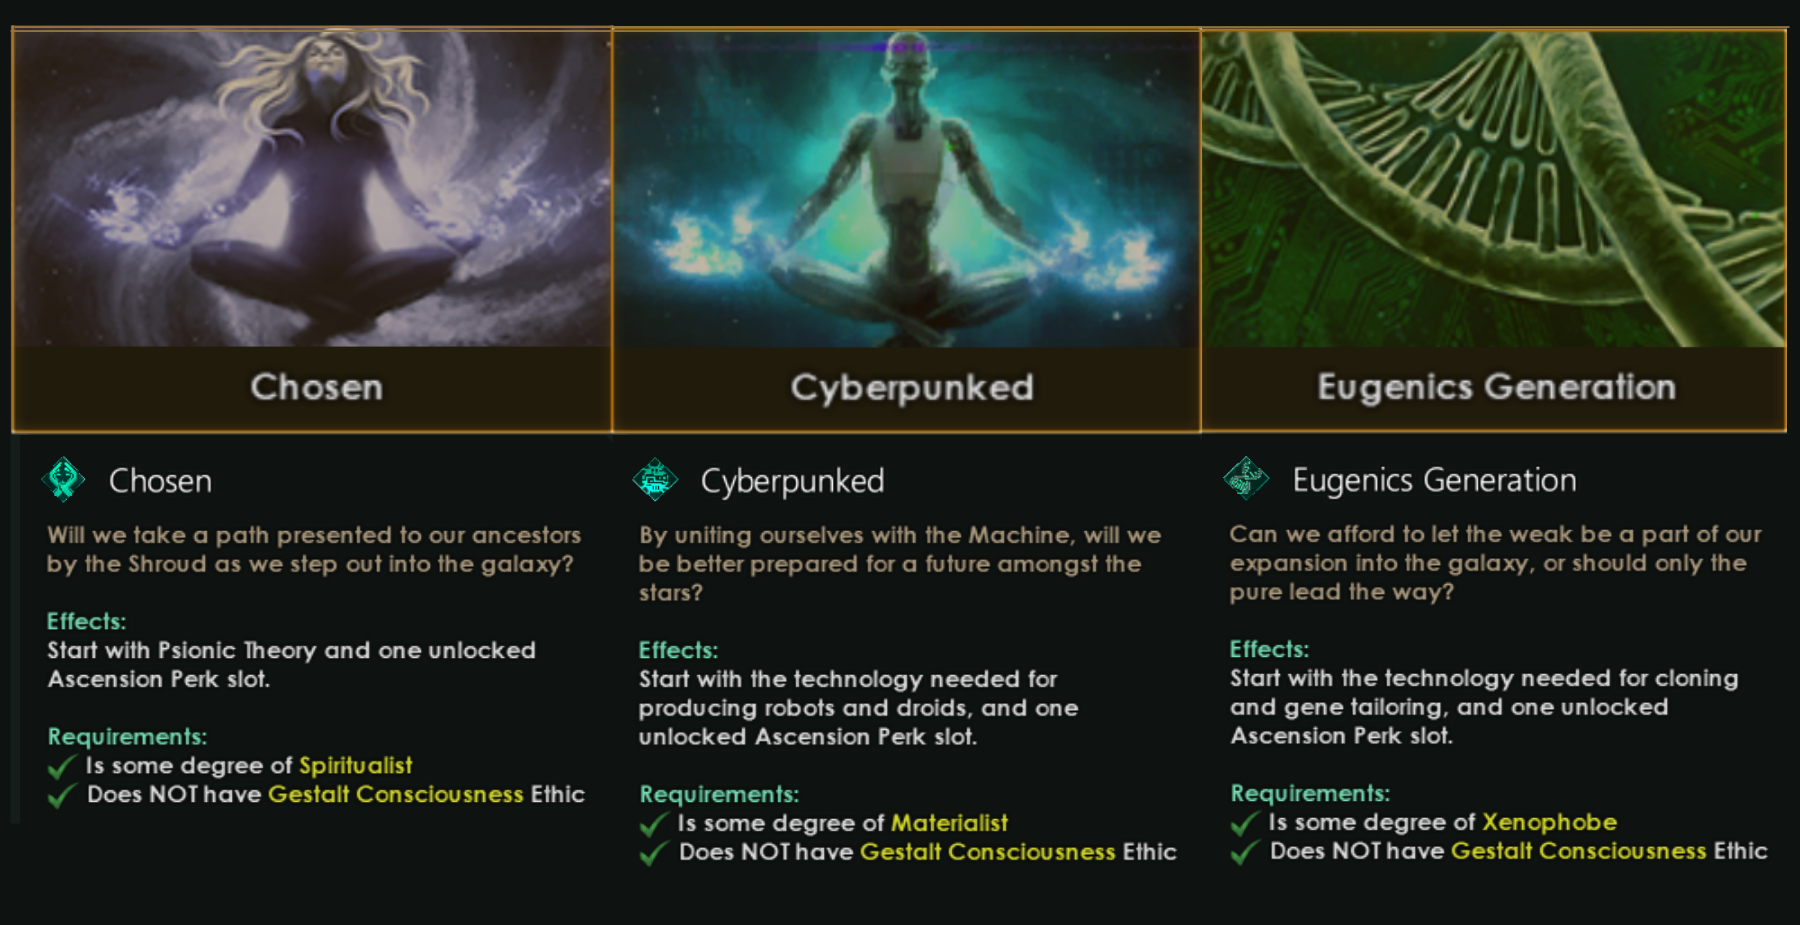 Is it possible in Stellaris to customize the Galaxy without mods